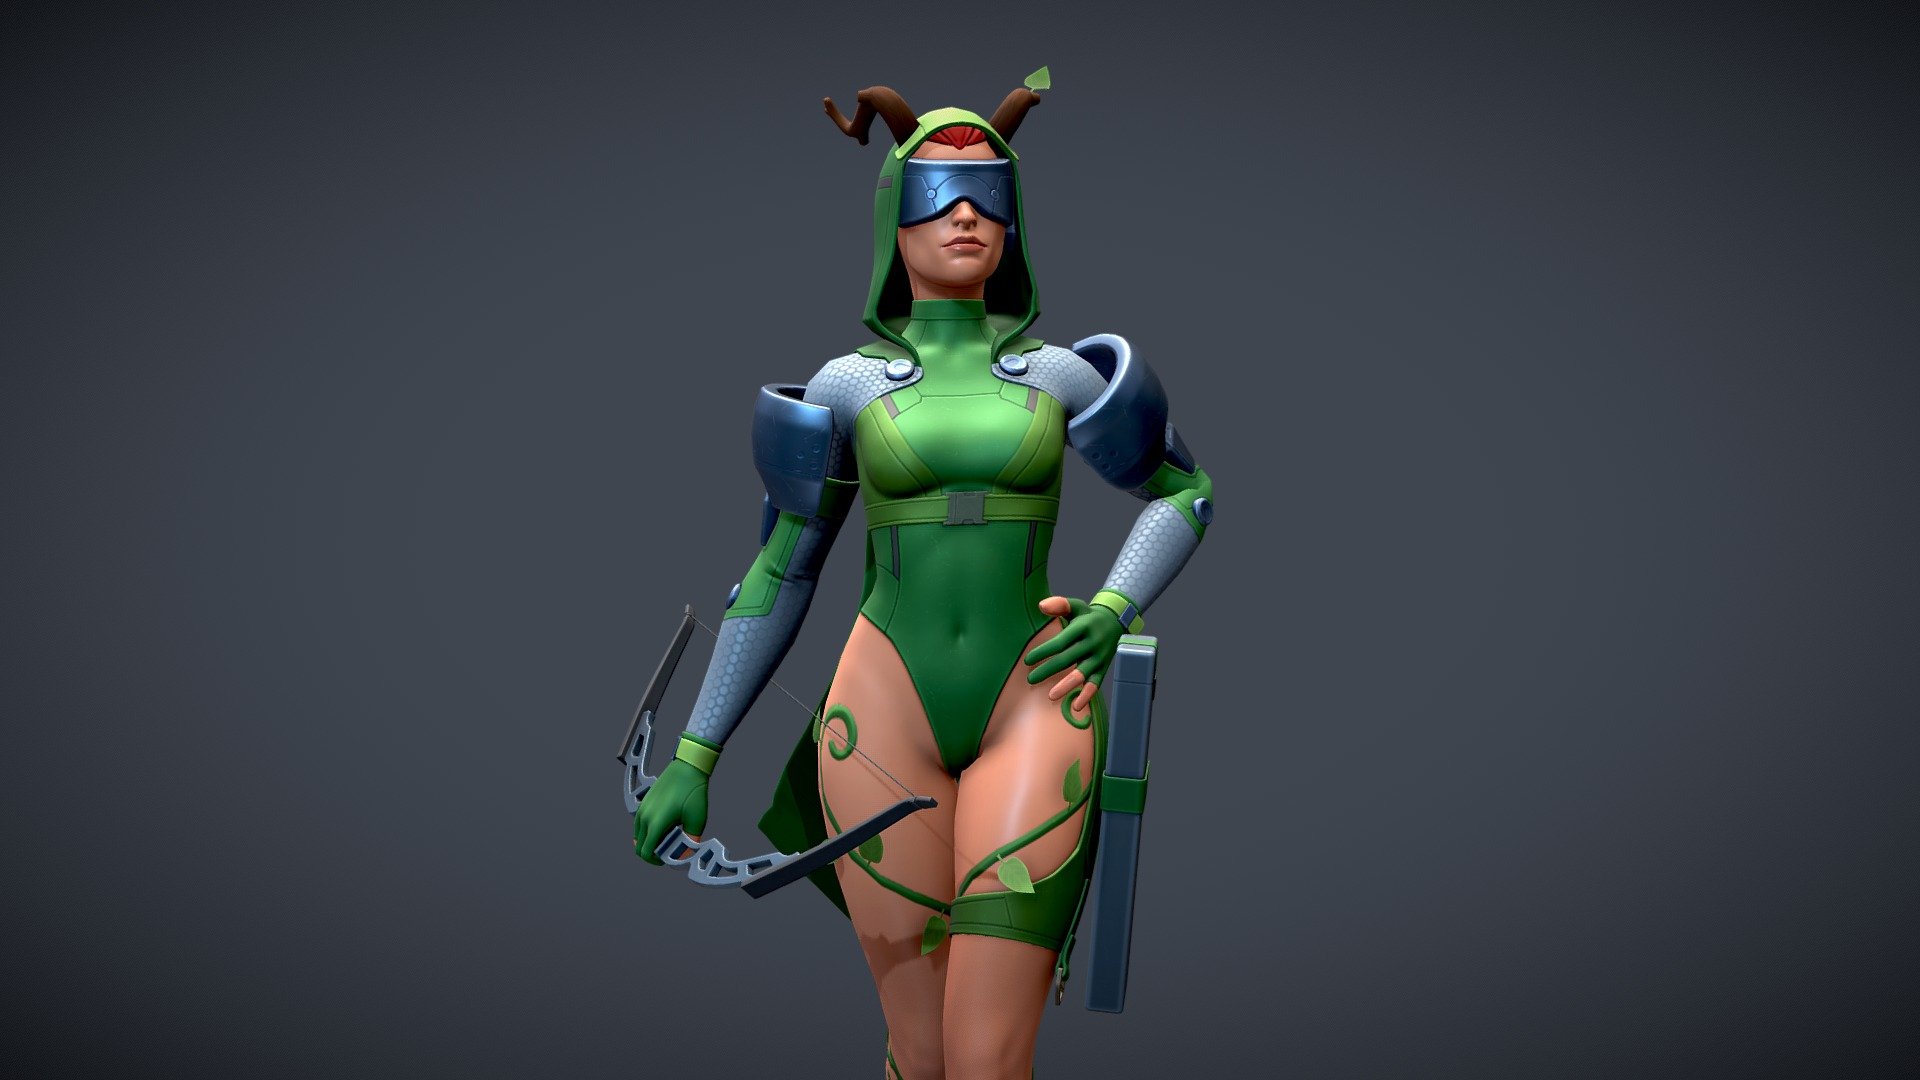 It's  my original character and she is a forest nymph. I like combined sci-fi elements with mythology.

You can find hi-res renders in my ArtStation portfolio https://www.artstation.com/artwork/8wKRDR - Dryad - 3D model by artrobot 3d model